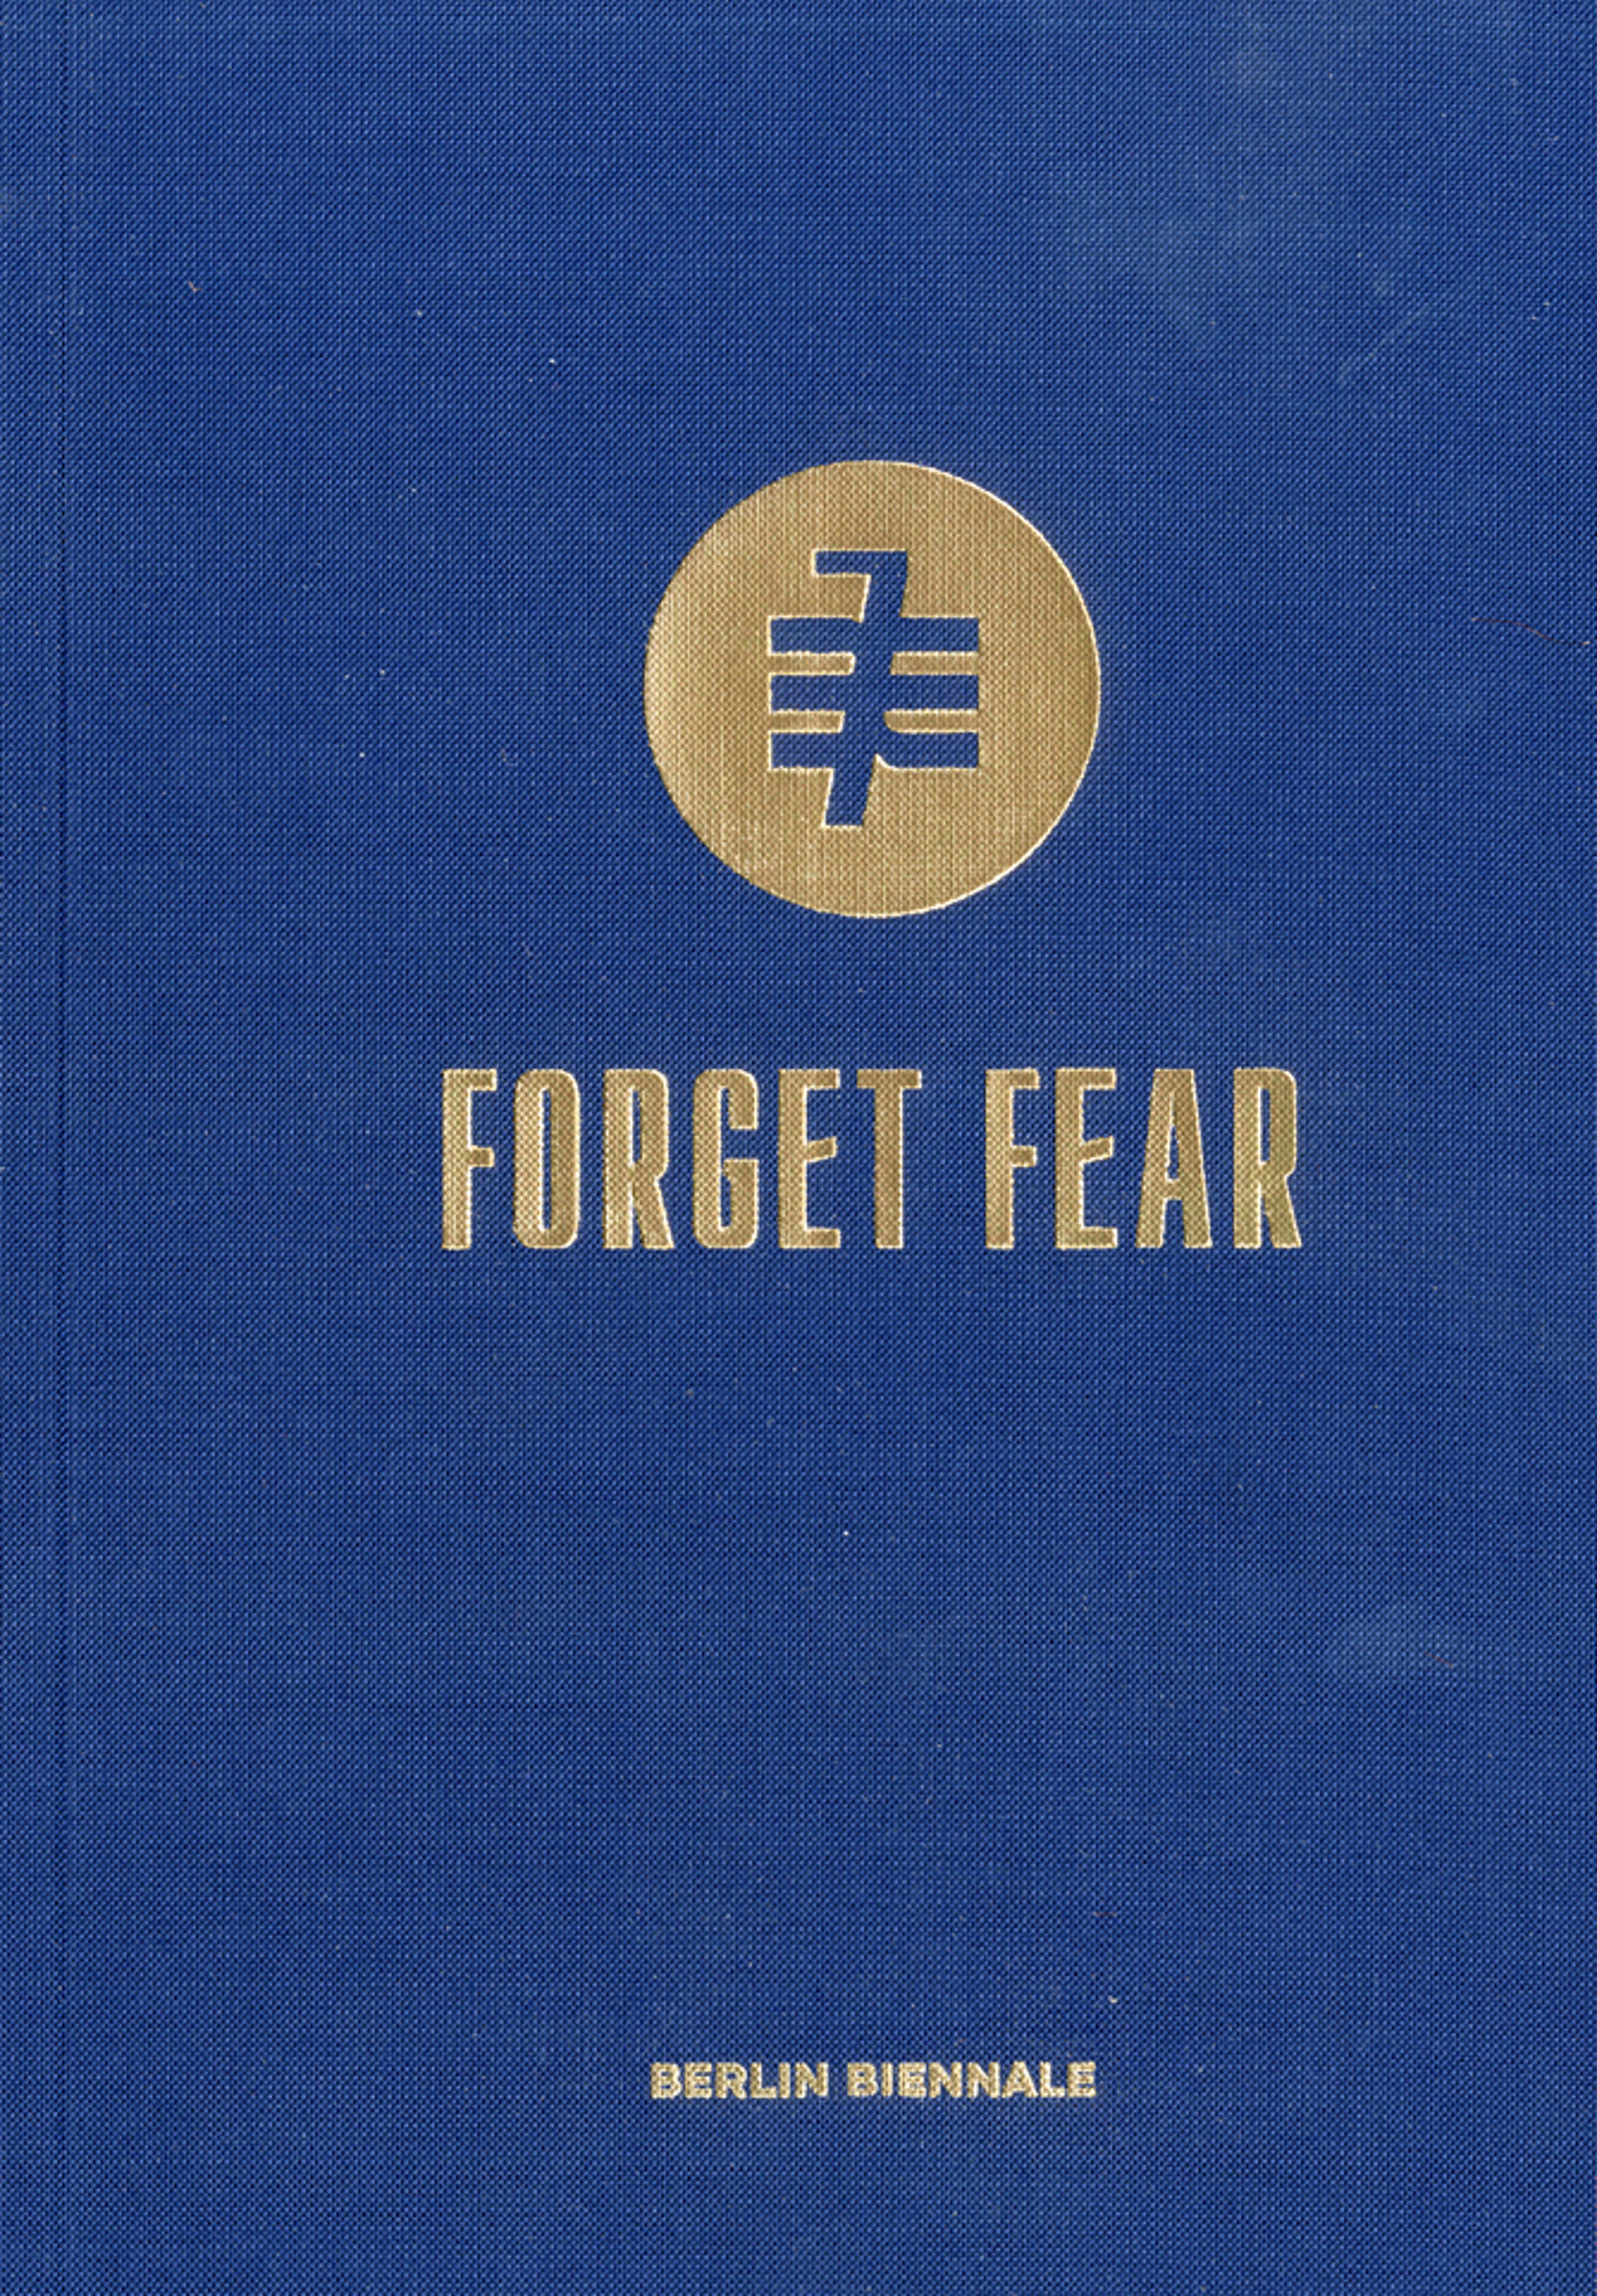 The cover of Forget Fear for Berlin Biennale